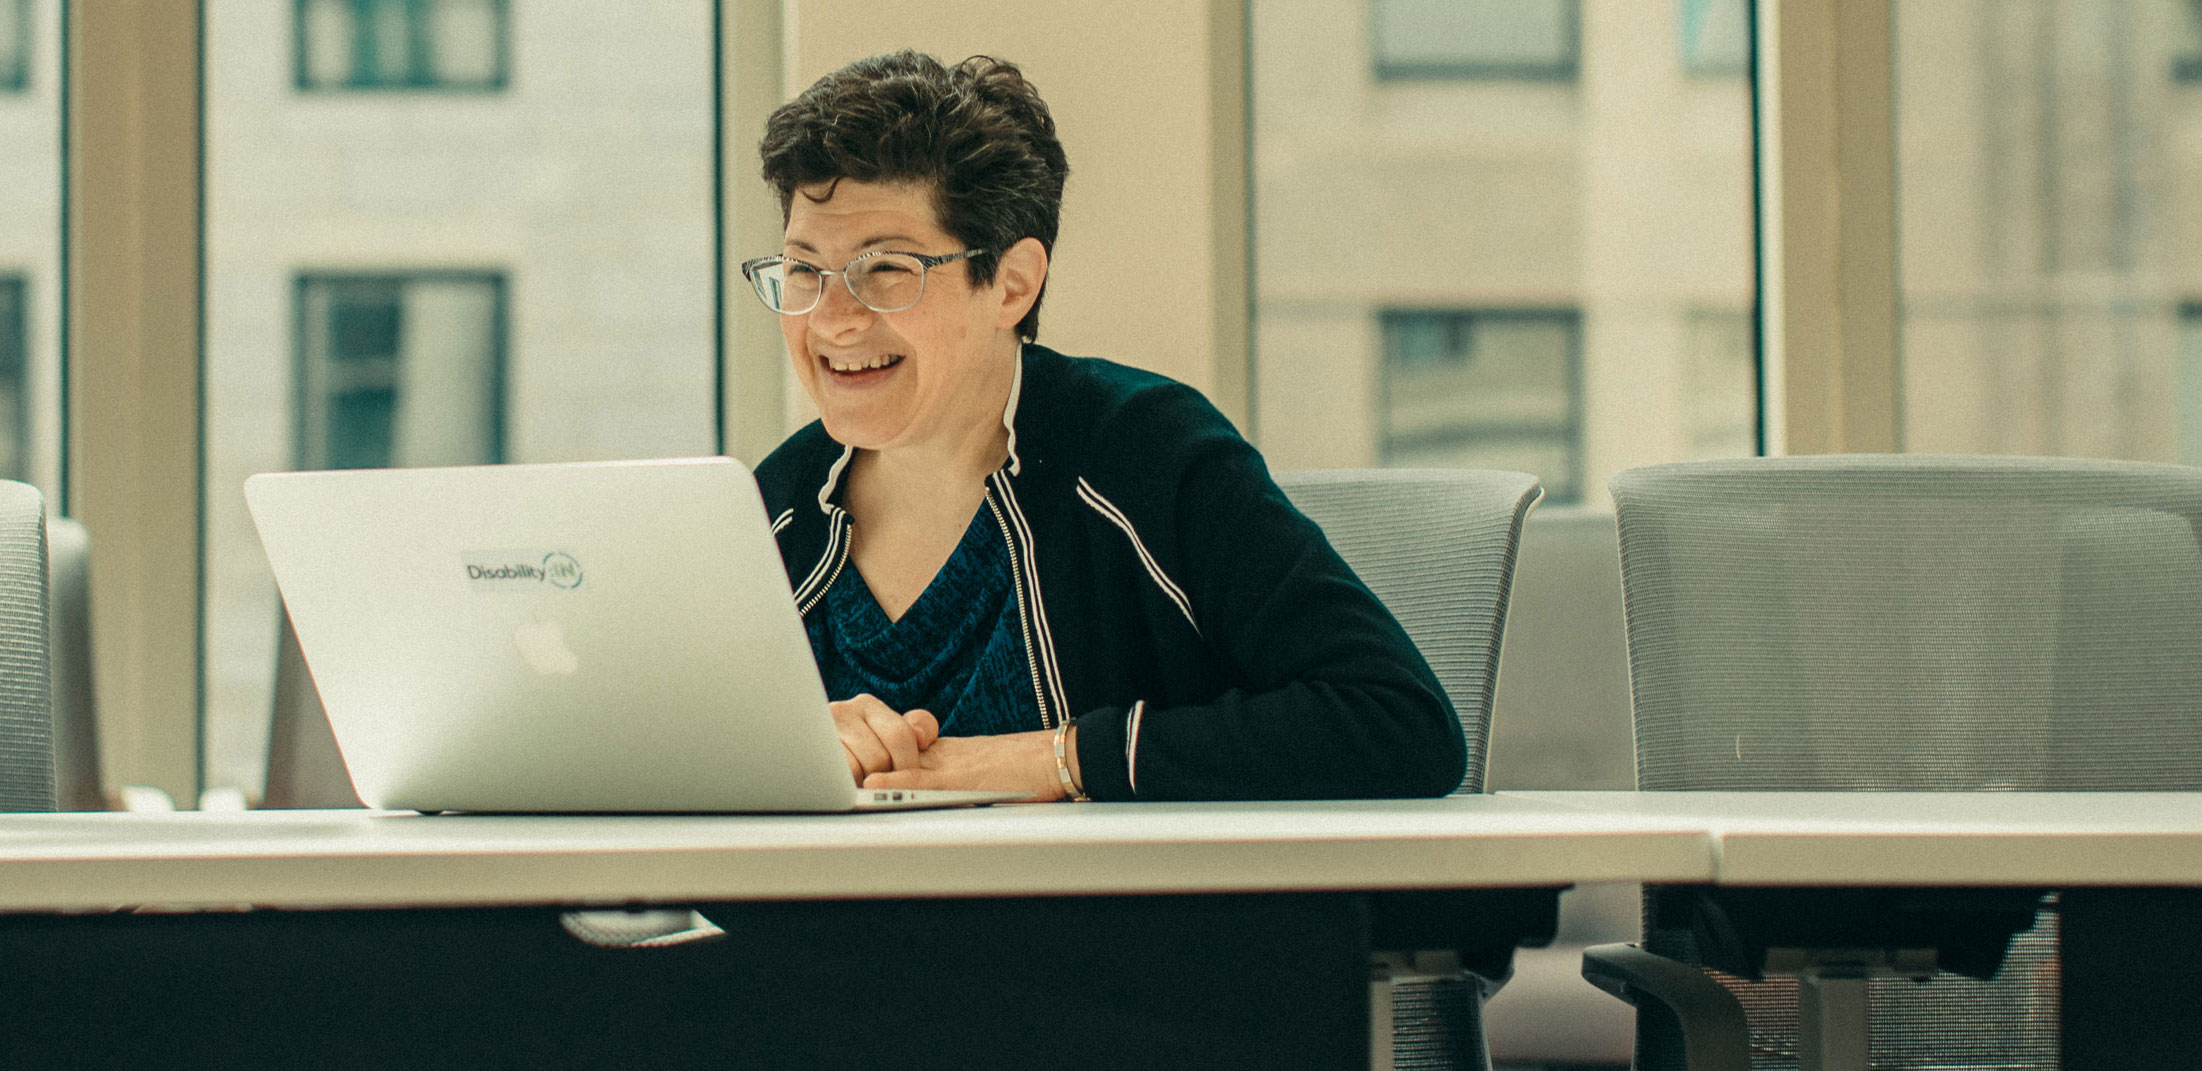 A woman sits at a conference table, using a laptop, smiling at the camera.